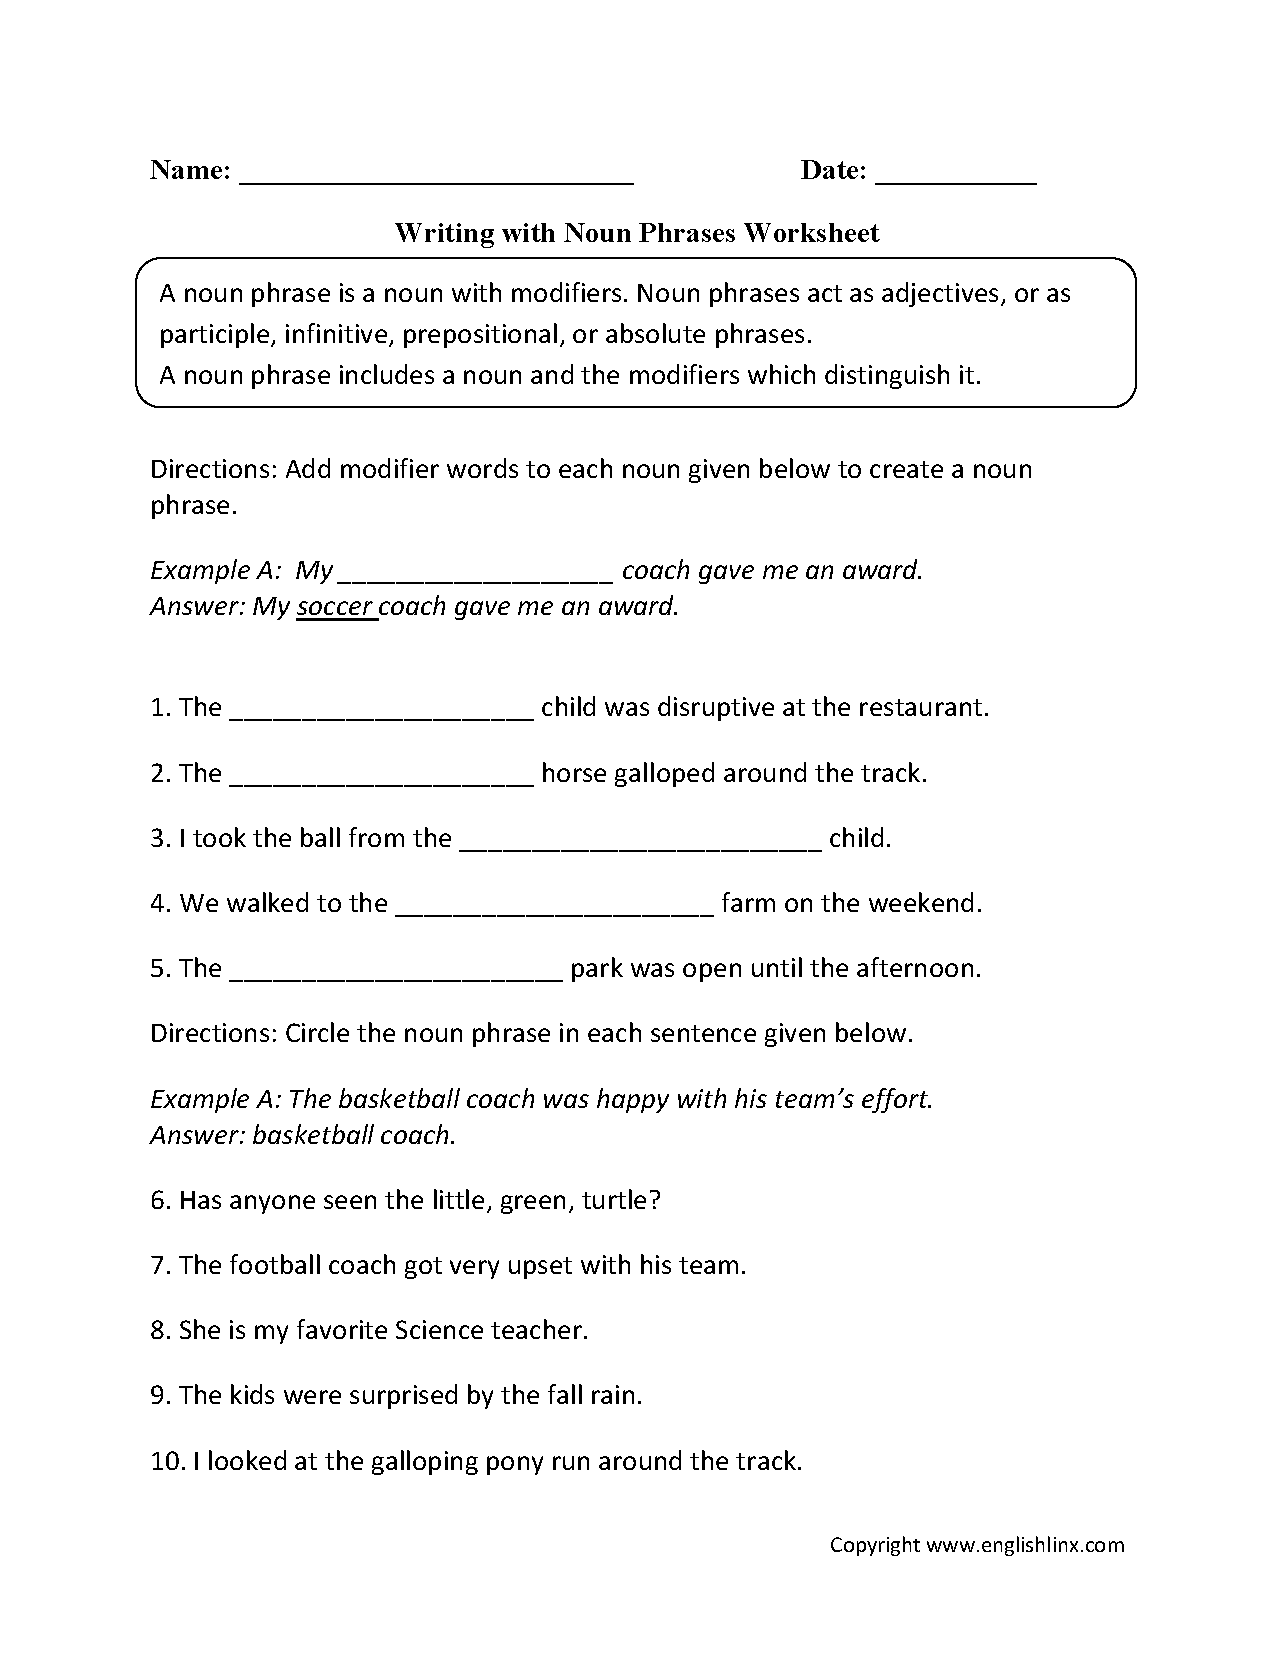 Writing with Noun Phrases Worksheets